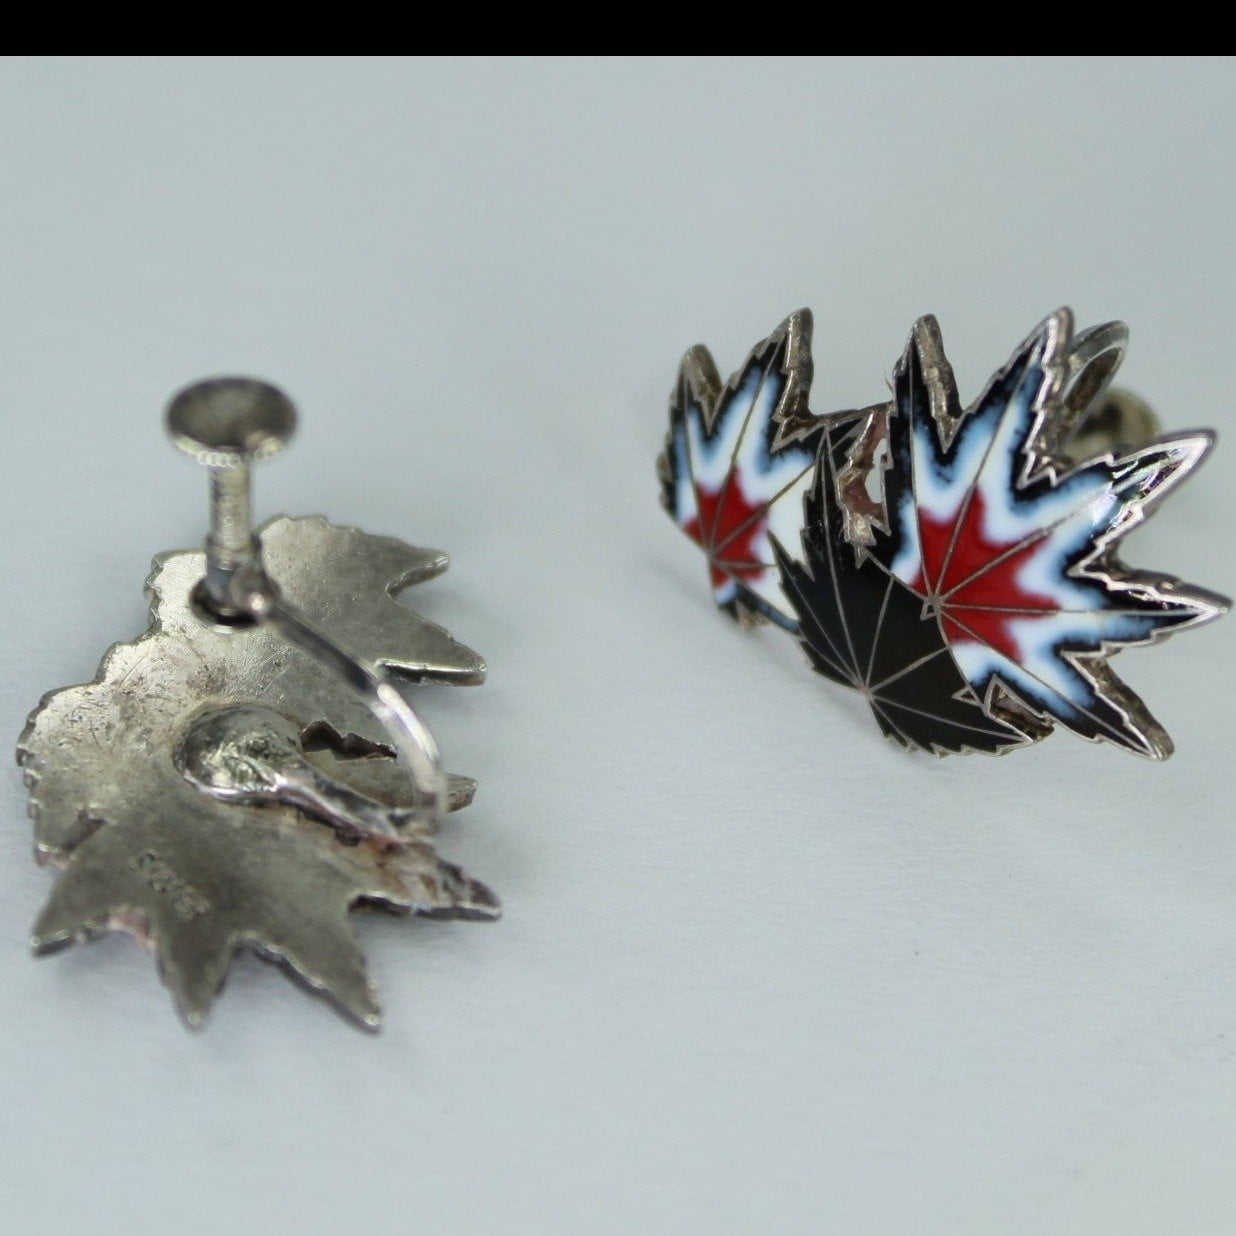 Vintage Enamel Earrings Silver Modernist Leaves Black Red Denmark Style finely crafted